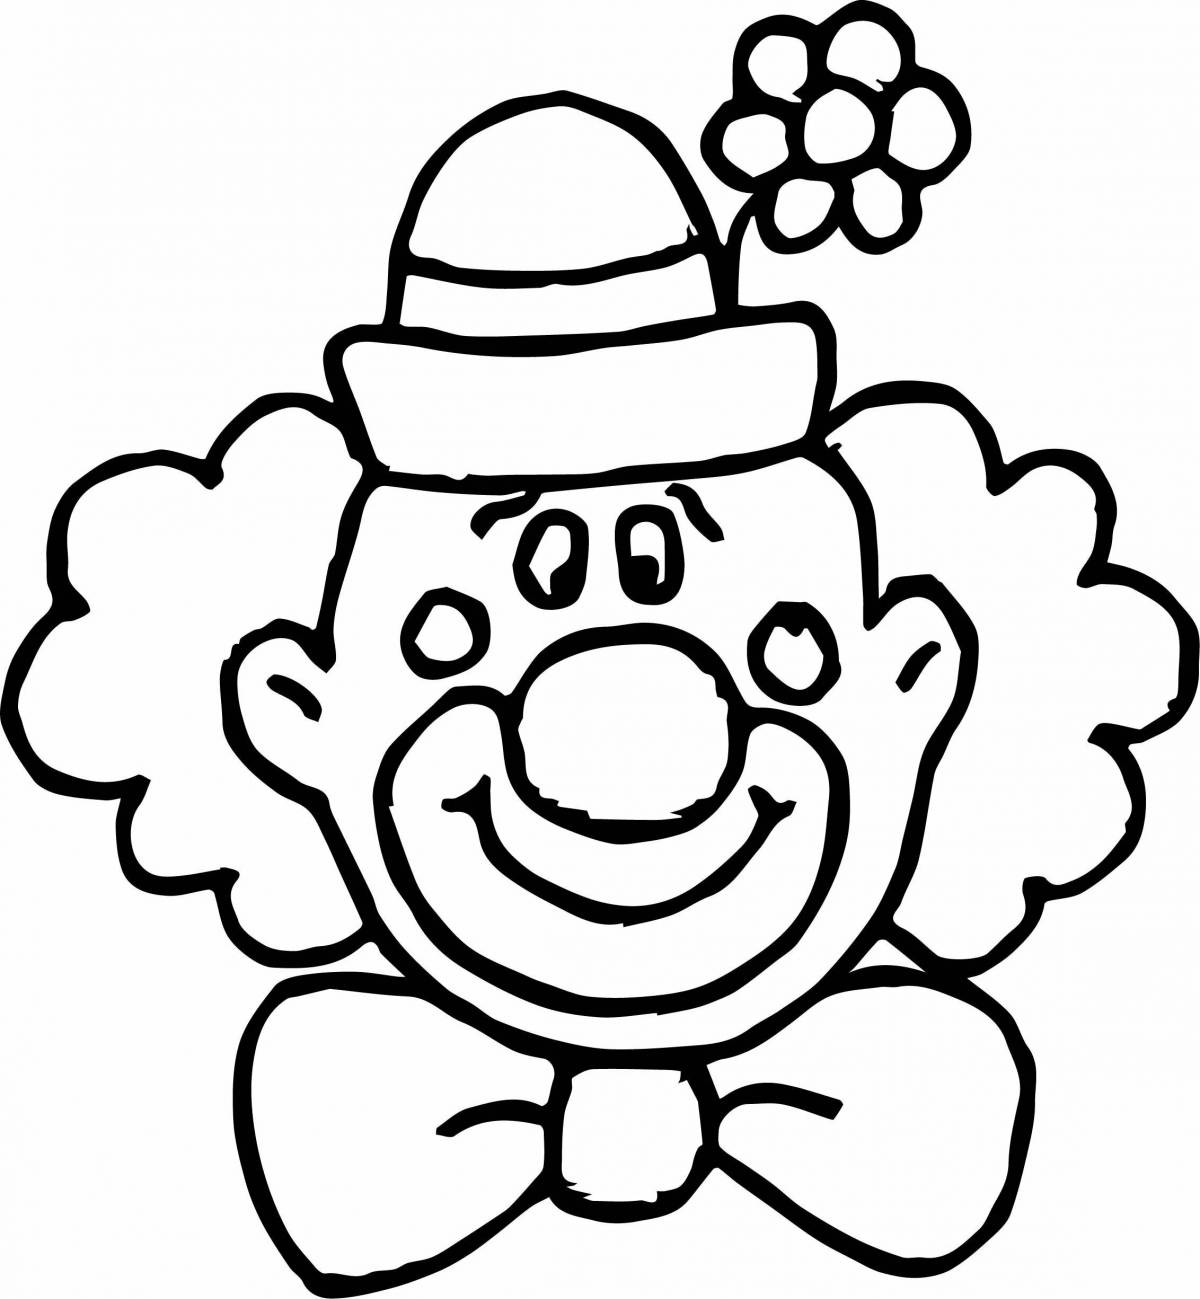 Humorous drawing of a clown for children